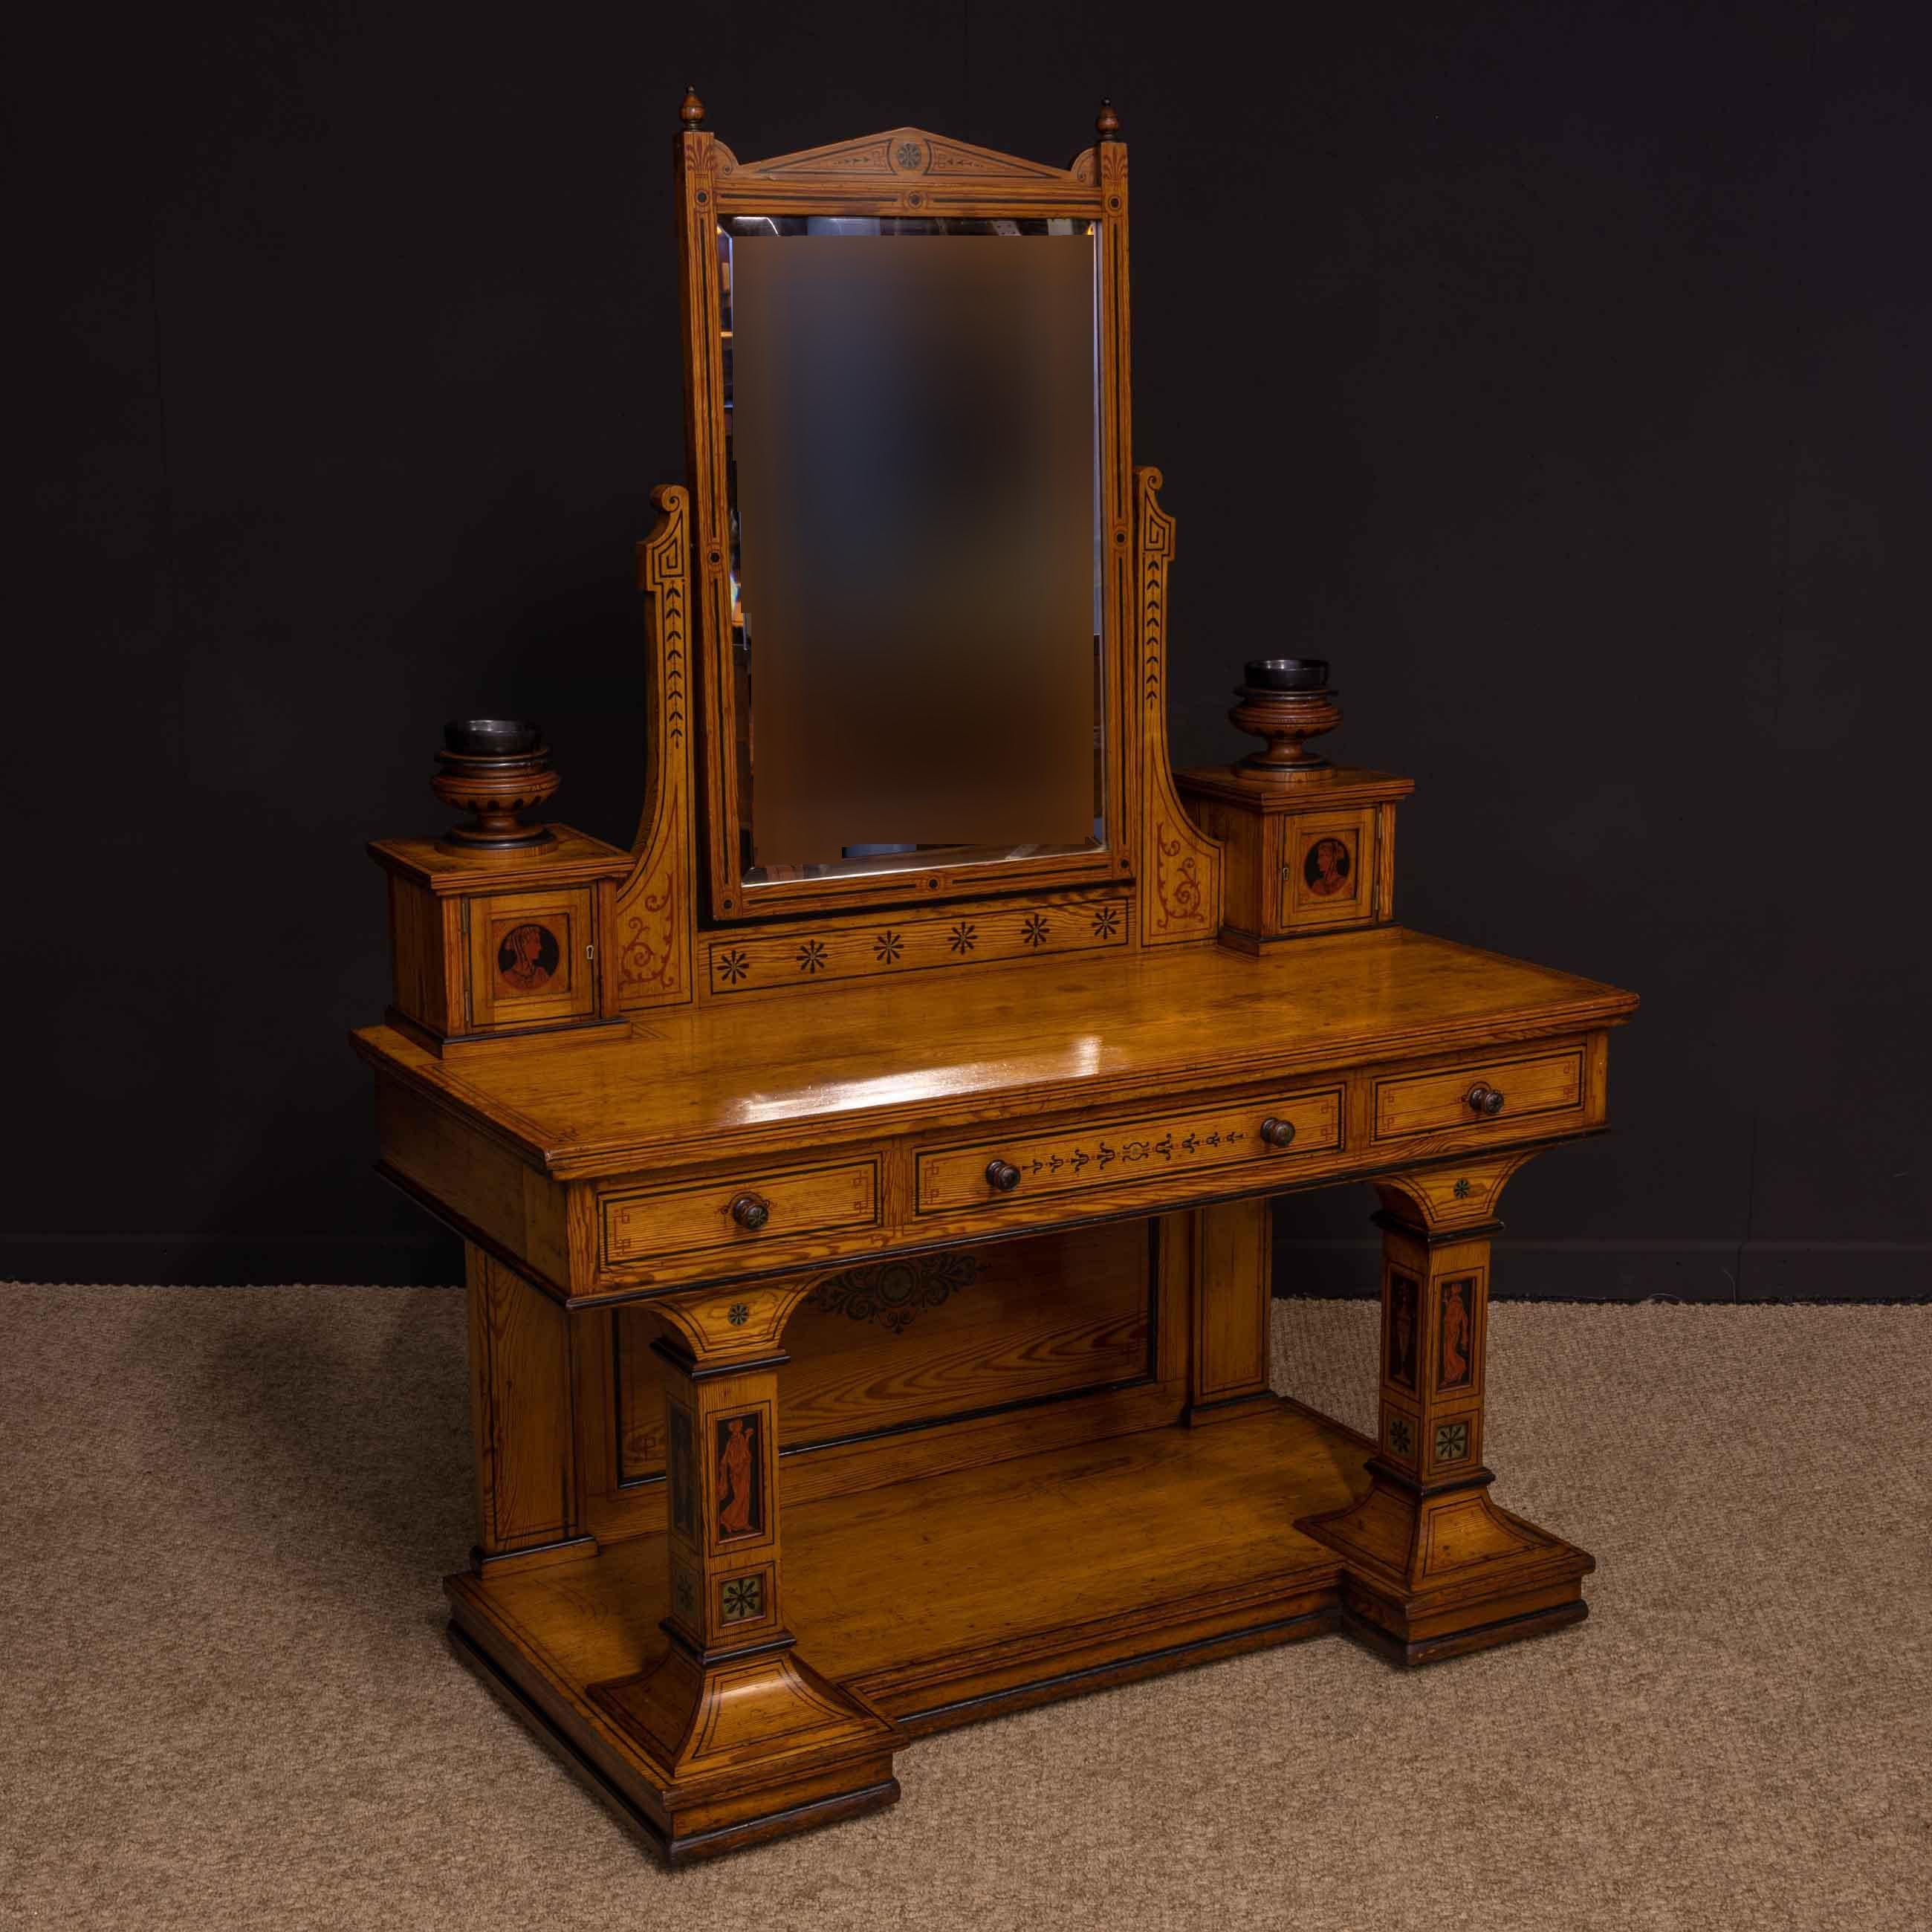 A Victorian pitch pine dressing table in a very unusual neoclassical design. Hand painted throughout in red and black lining and various foliage and geometric designs. The supports have hand painted classical portraits and urns. The drawer knobs